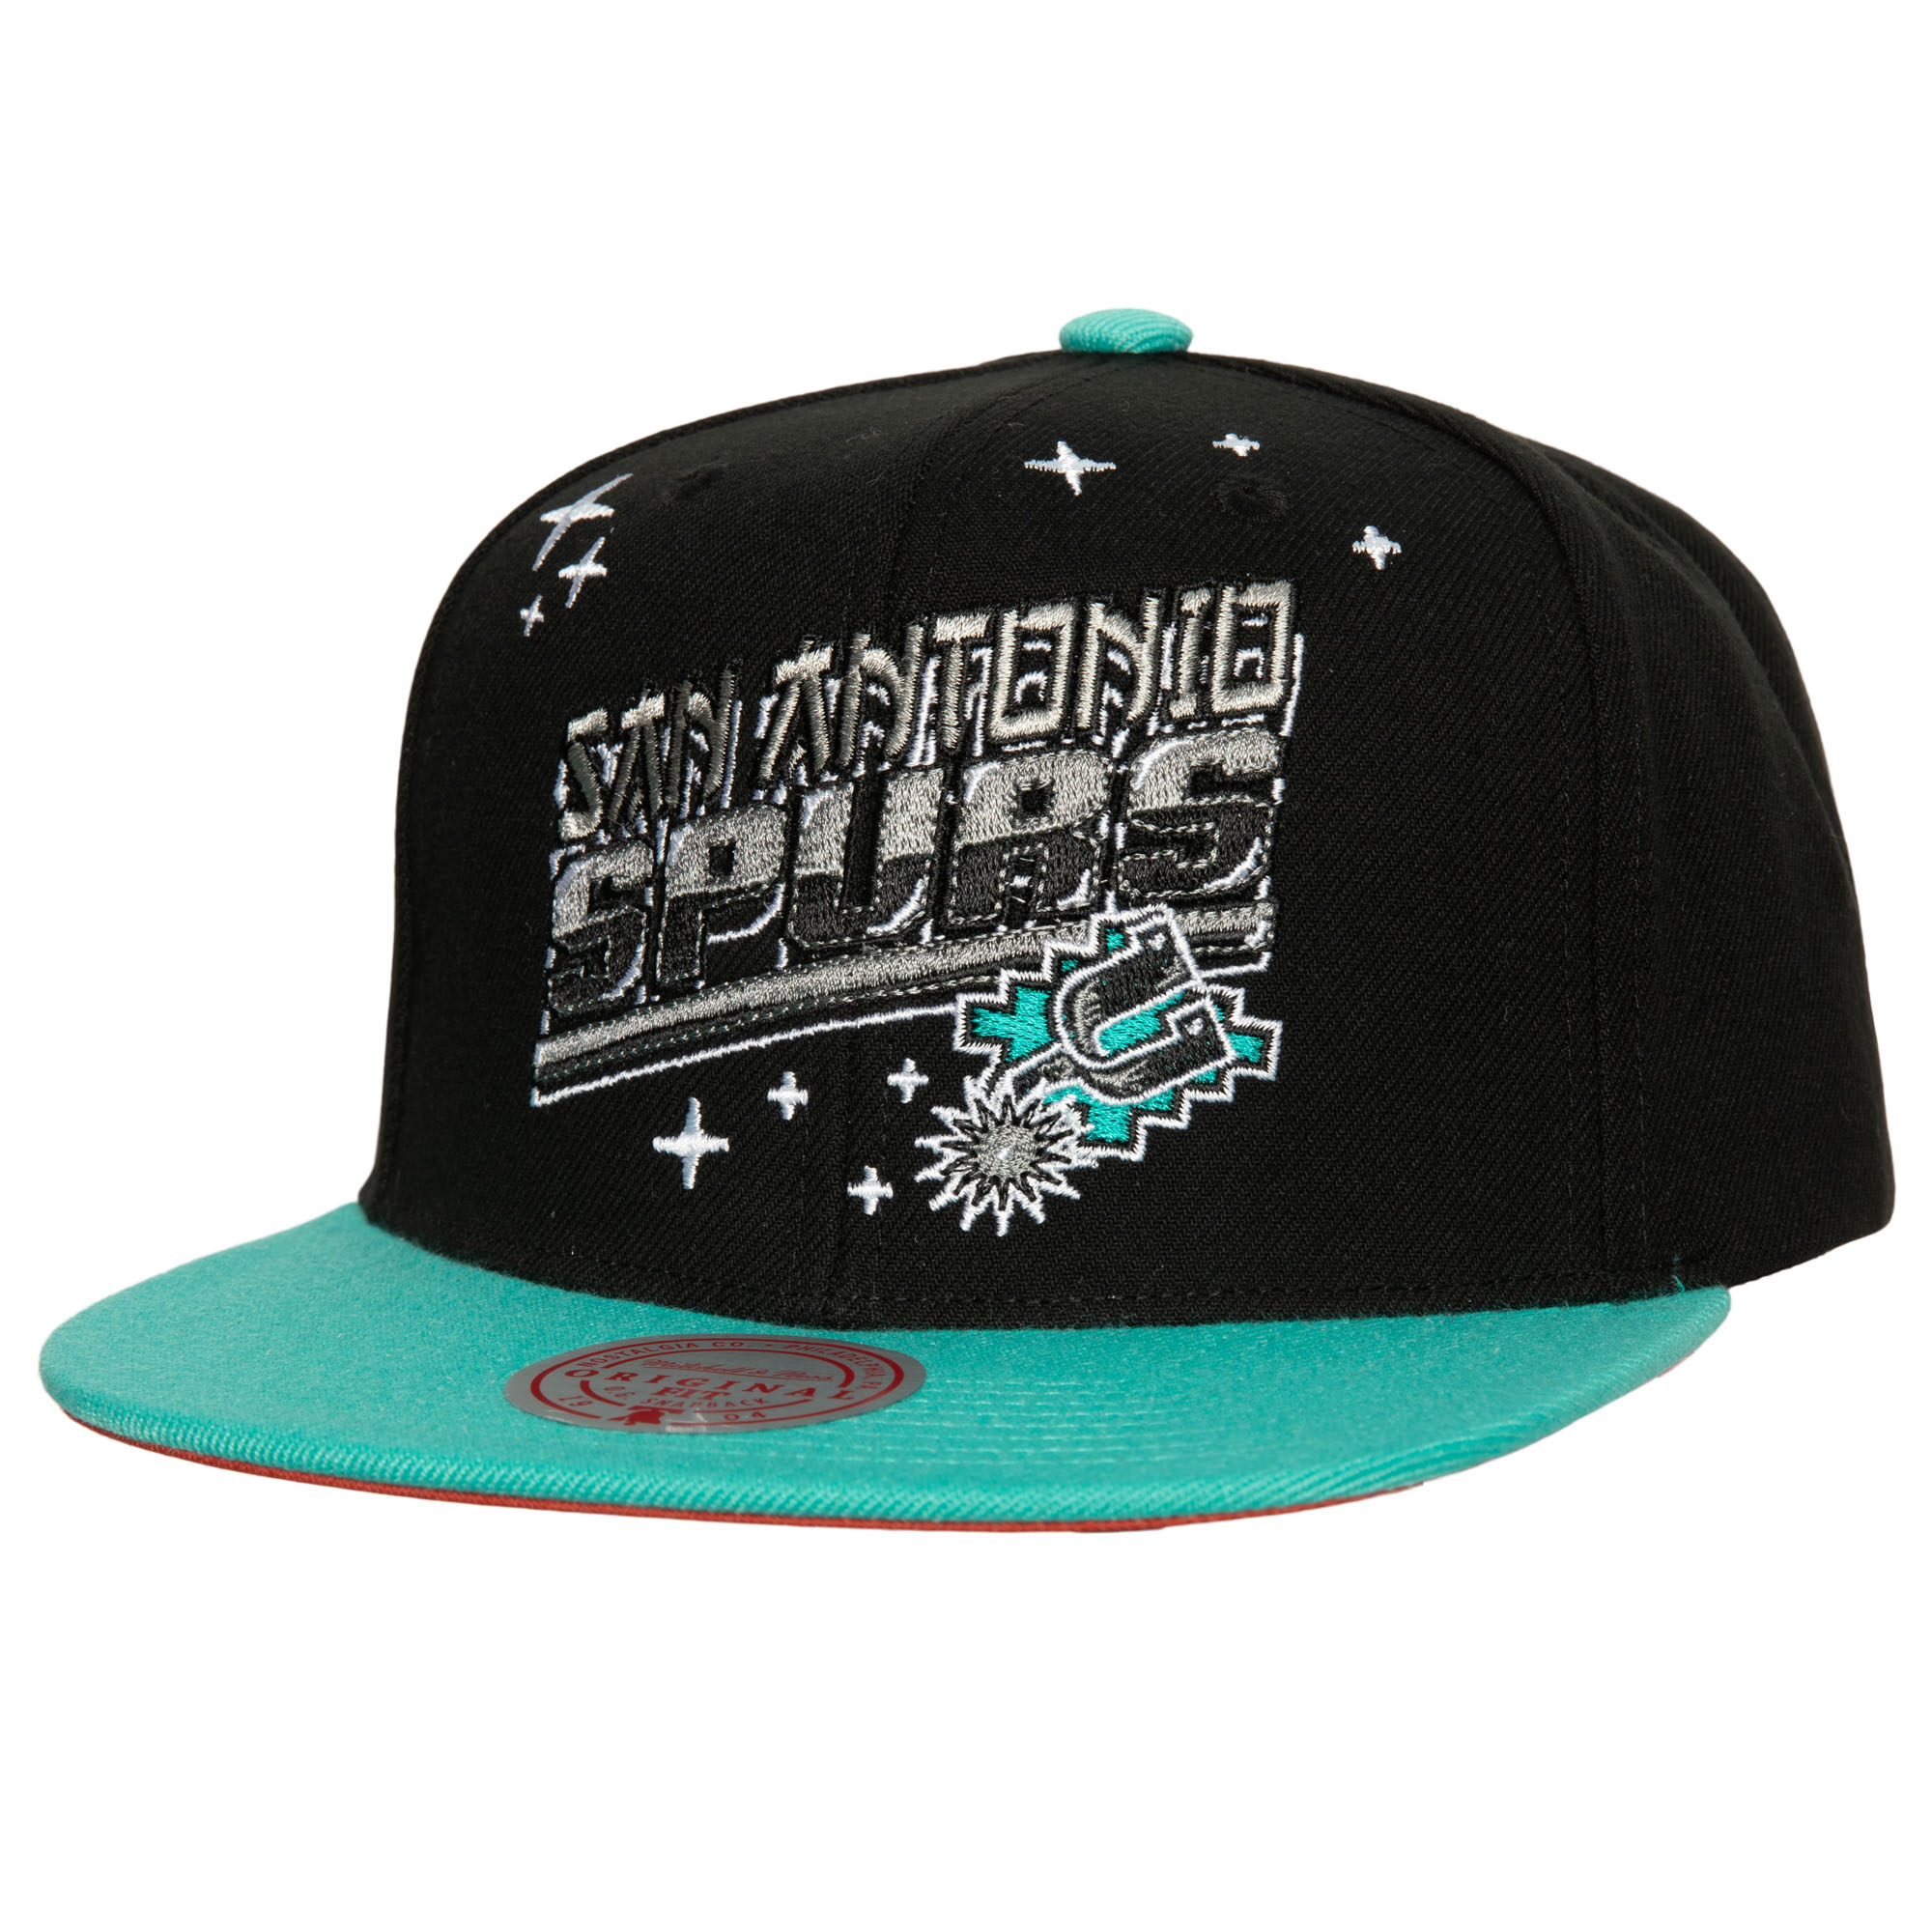 Mitchell & Ness 1996 NBA All Star Weekend Snapback Hat in Teal